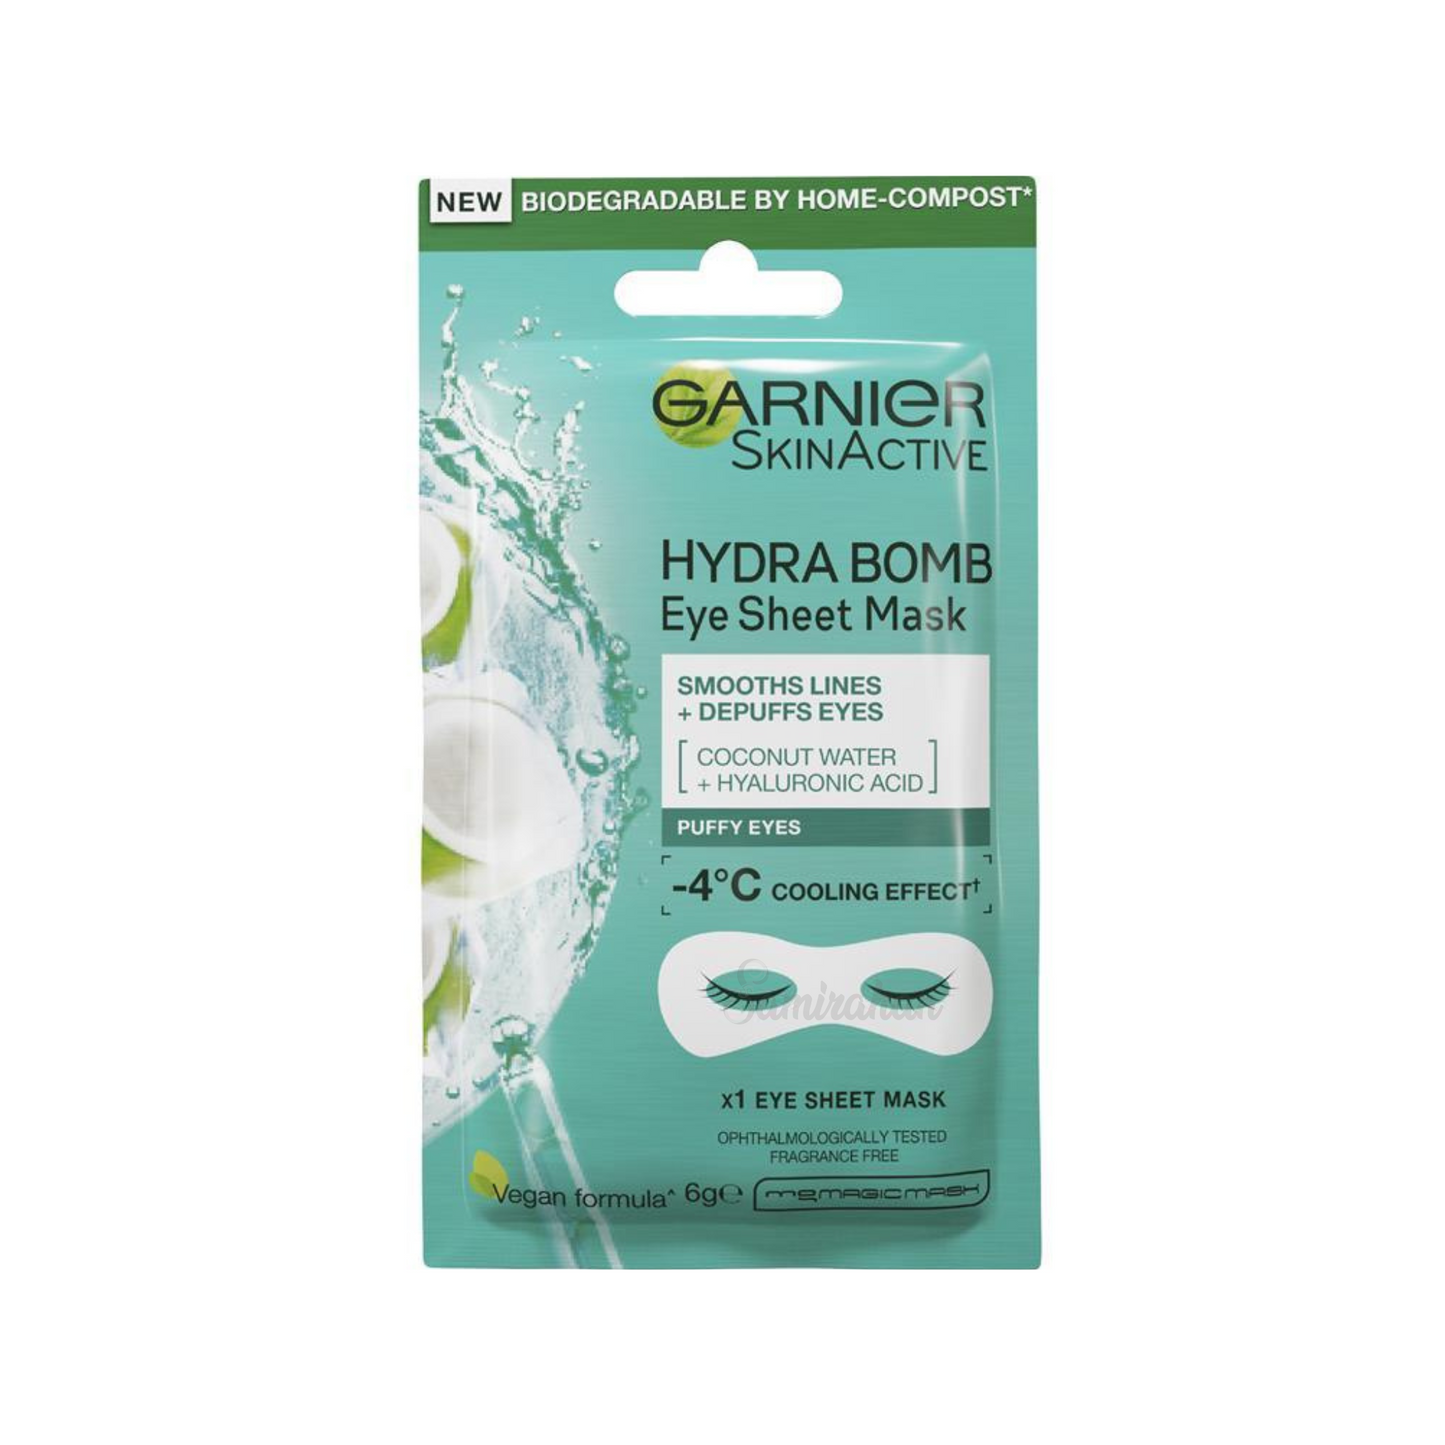 Garnier SkinActive Moisture Bomb is a super brightening & refreshing eye sheet mask for tired, puffy eyes showing signs of ageing. Contains Coconut  & hyaluronic acid. In just 15 minutes, leaves eye area looking firmer & feeling revitalized. Helps reduce eye bags & dark circles. Best eye sheet mask in Dhaka Bangladesh.